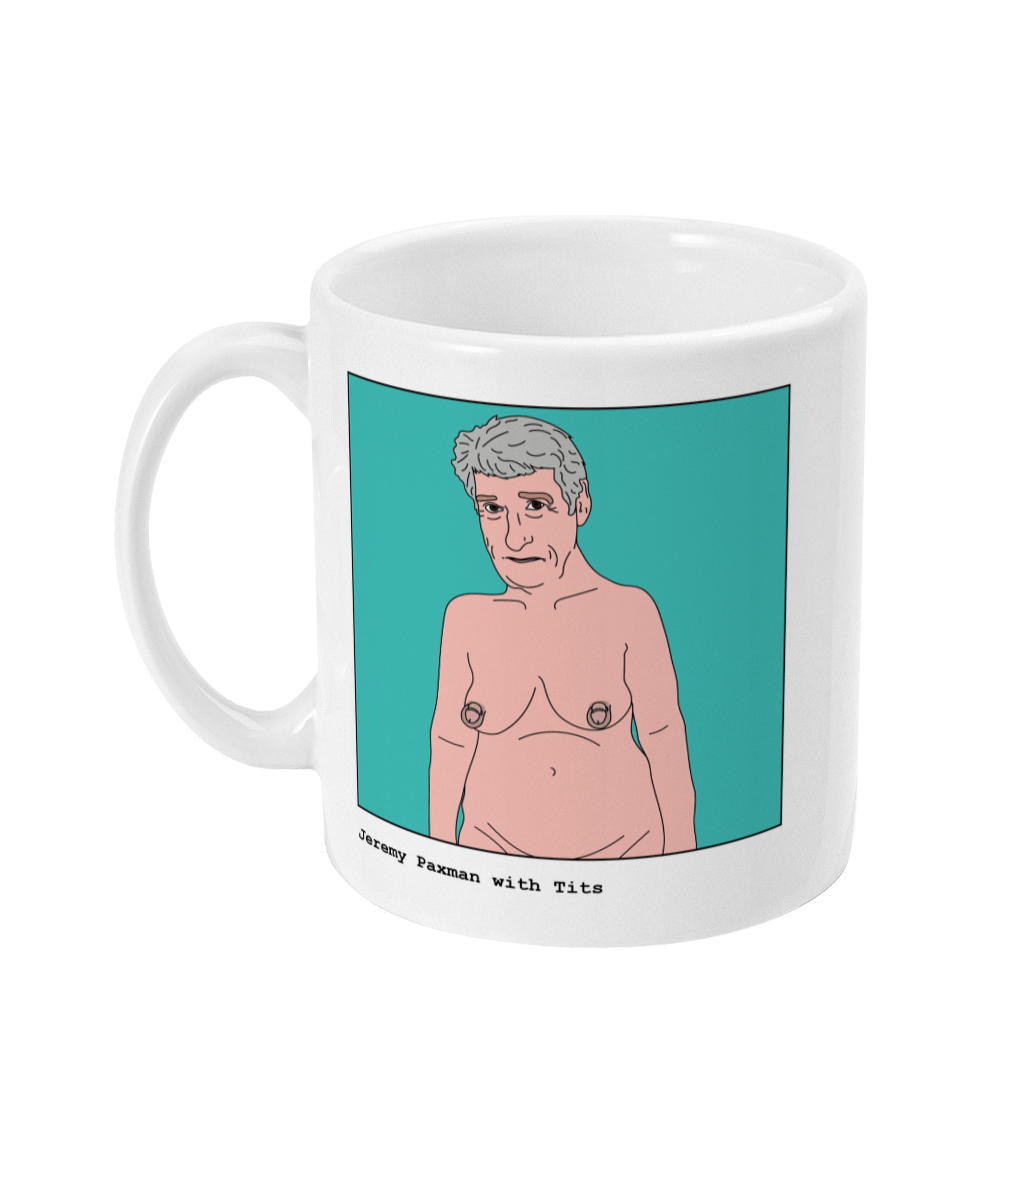 Jeremy Paxman with Tits